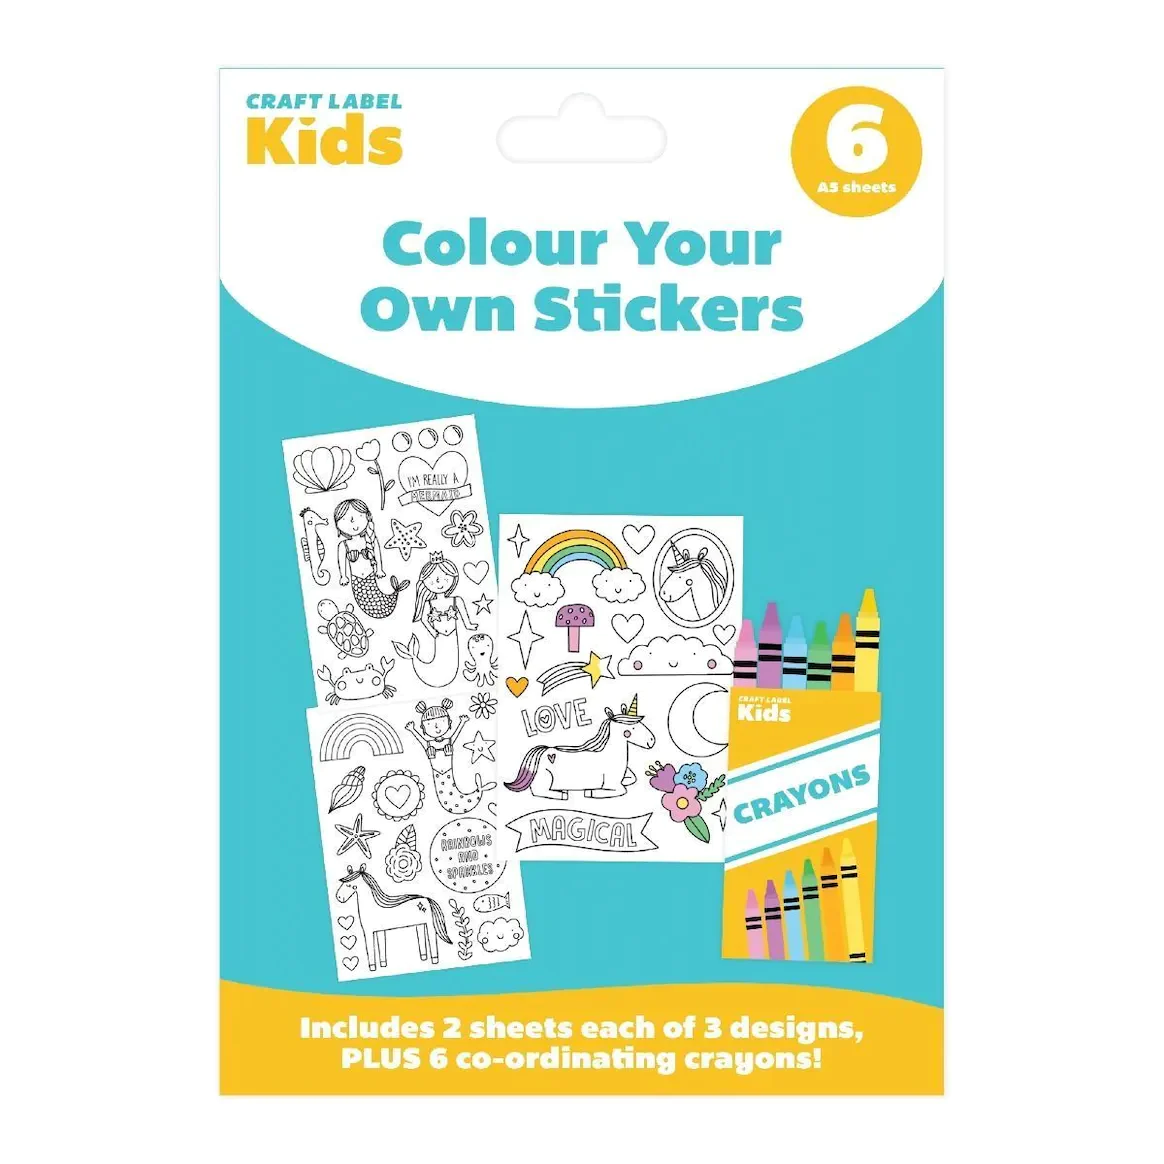 Craft Label Kids Colour Your Own Stickers - Fantasy